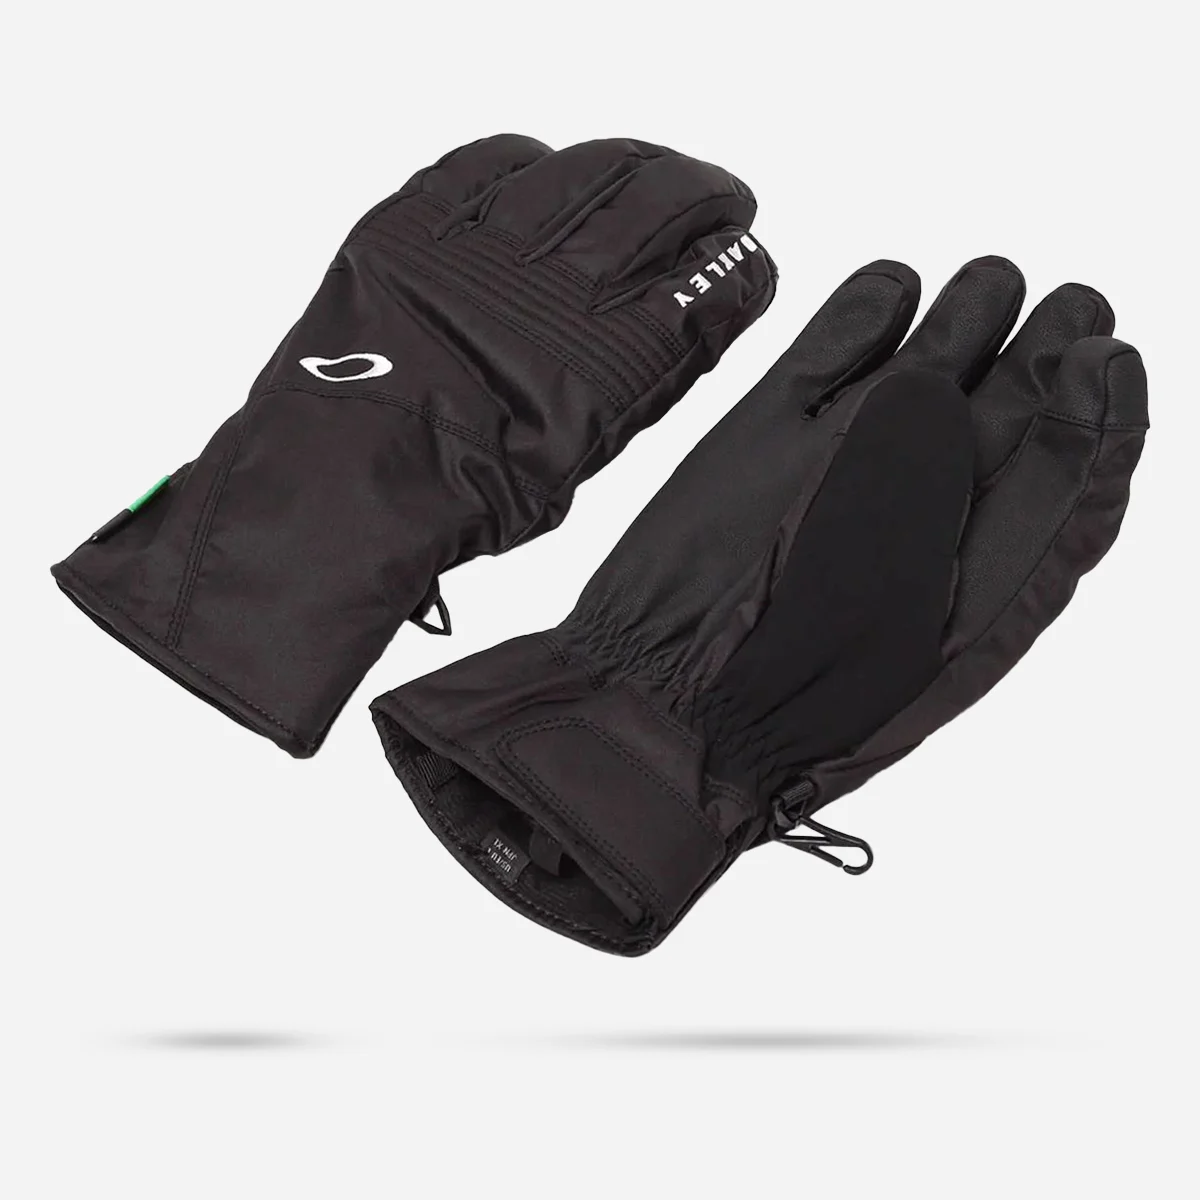 Oakley Roundhouse glove